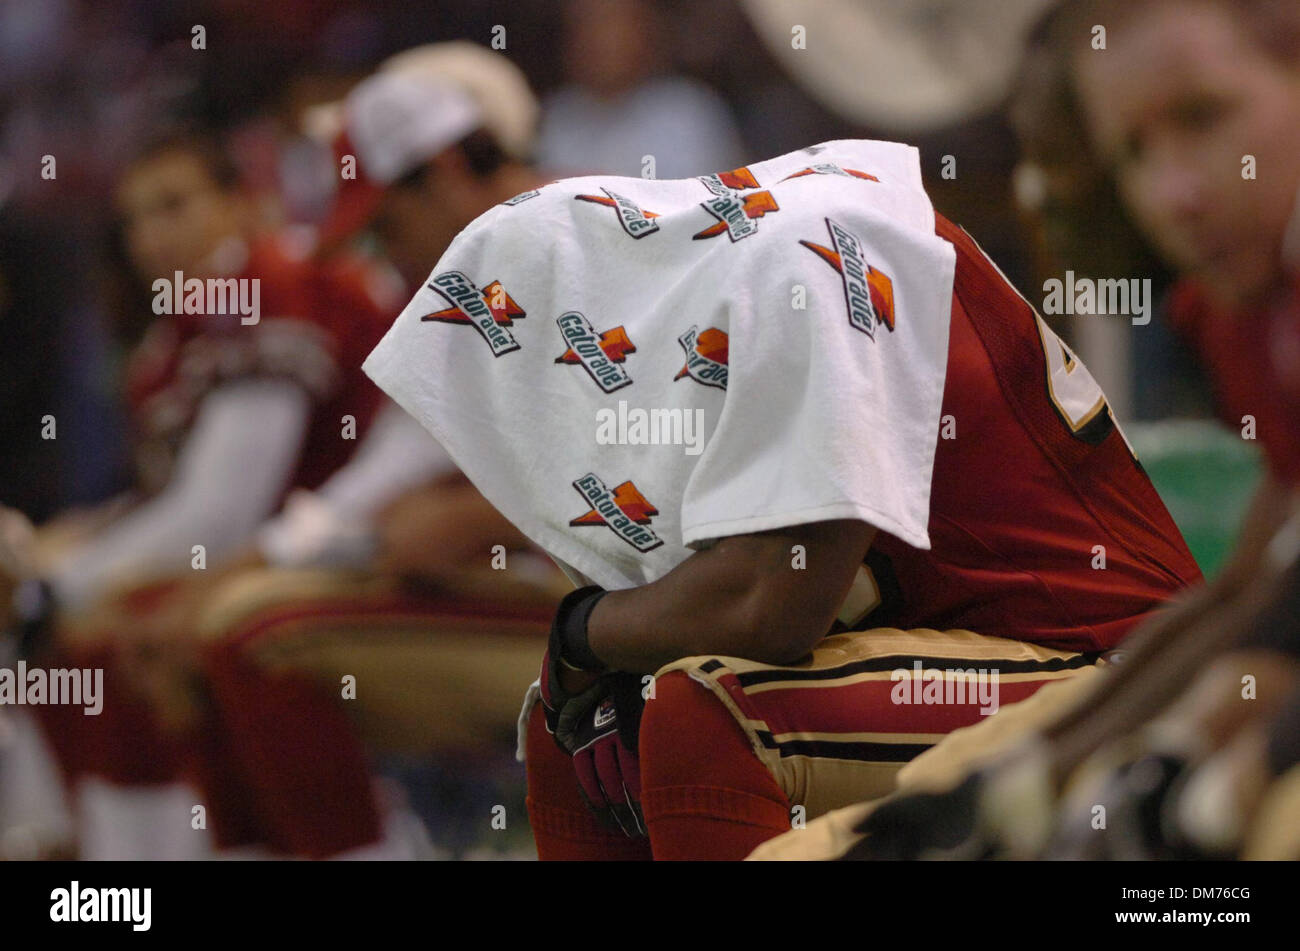 Oct 02, 2005; Mexico City, MEXICO; NFL FOOTBALL: 49er fullback Fred Beasley finds a quiet space under a towel in the final minutes of Sunday evenings 31-14 loss to the Arizona Cardinals at Estadio Azteca in Mexico City, Mexico. Mandatory Credit: Photo by Jose Luis Villegas/Sacramento Bee/ZUMA Press. (©) Copyright 2005 by Jose Luis Villegas/Sacramento Bee Stock Photo